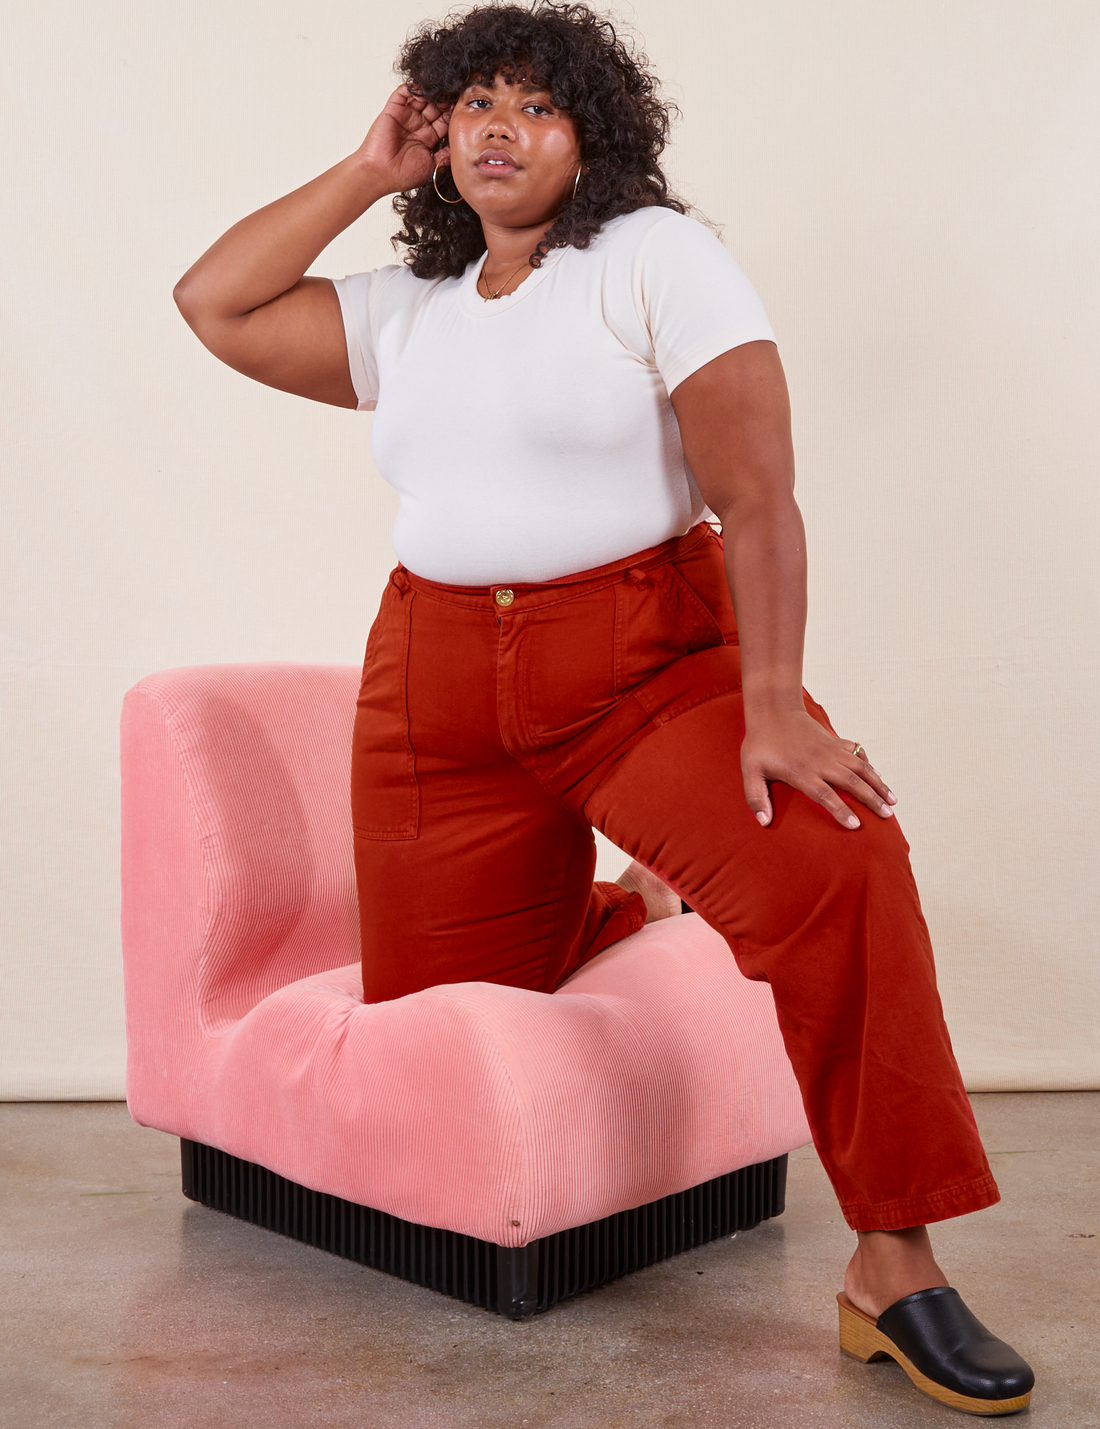 Work Pants in Paprika on Morgan wearing a vintage off-white Baby Tee. Morgan has one knee on a pink upholstered chair and the other leg on the ground.